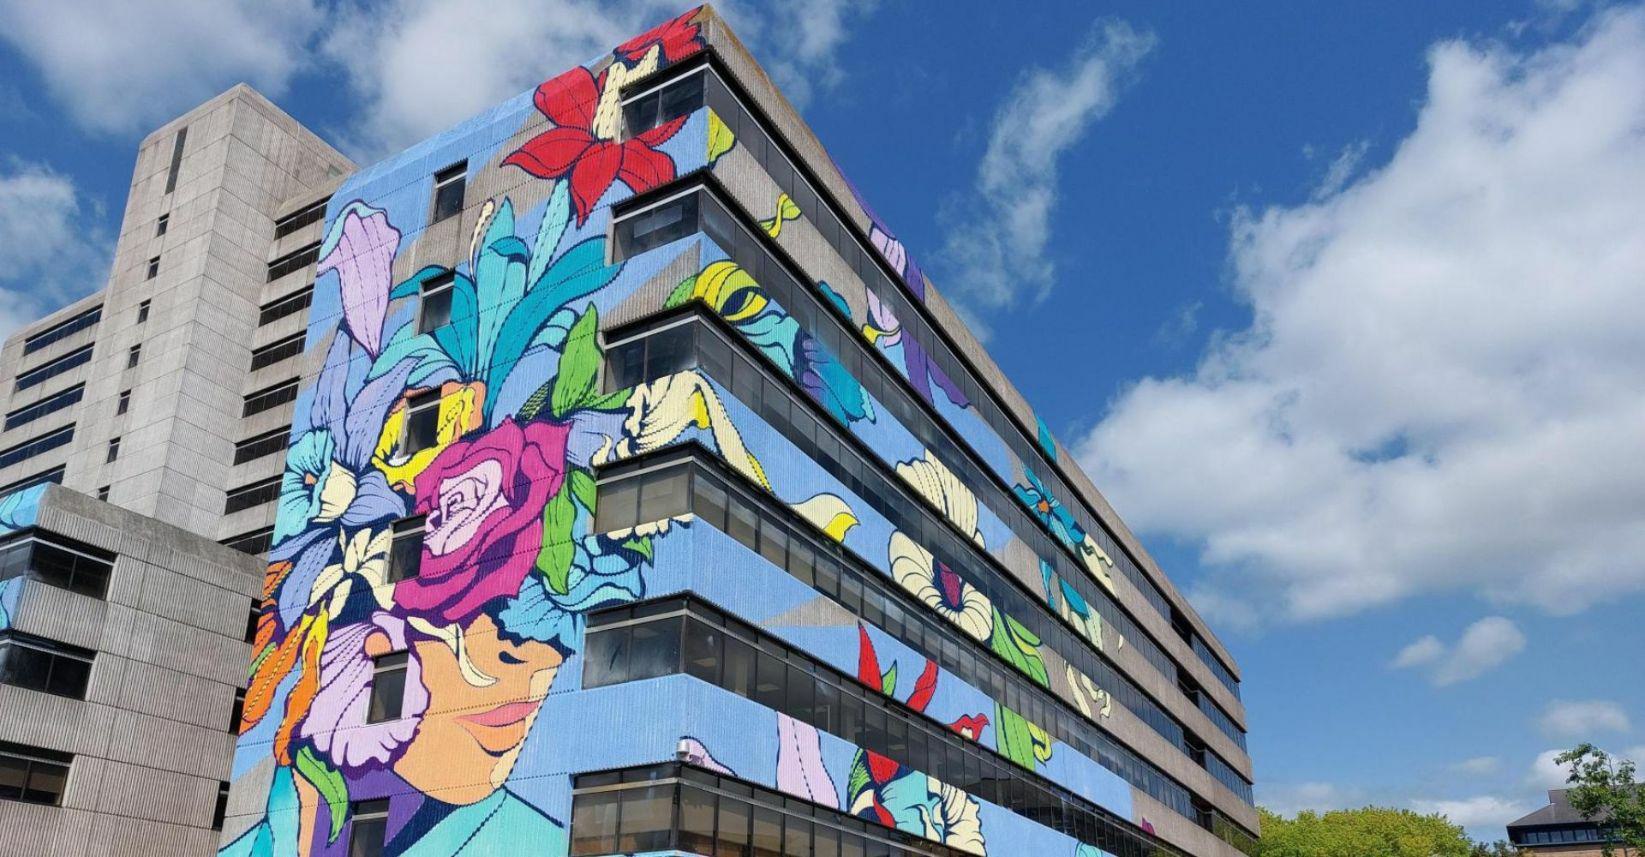 Giant colourful mural called "The Bulb" on Frobisher House